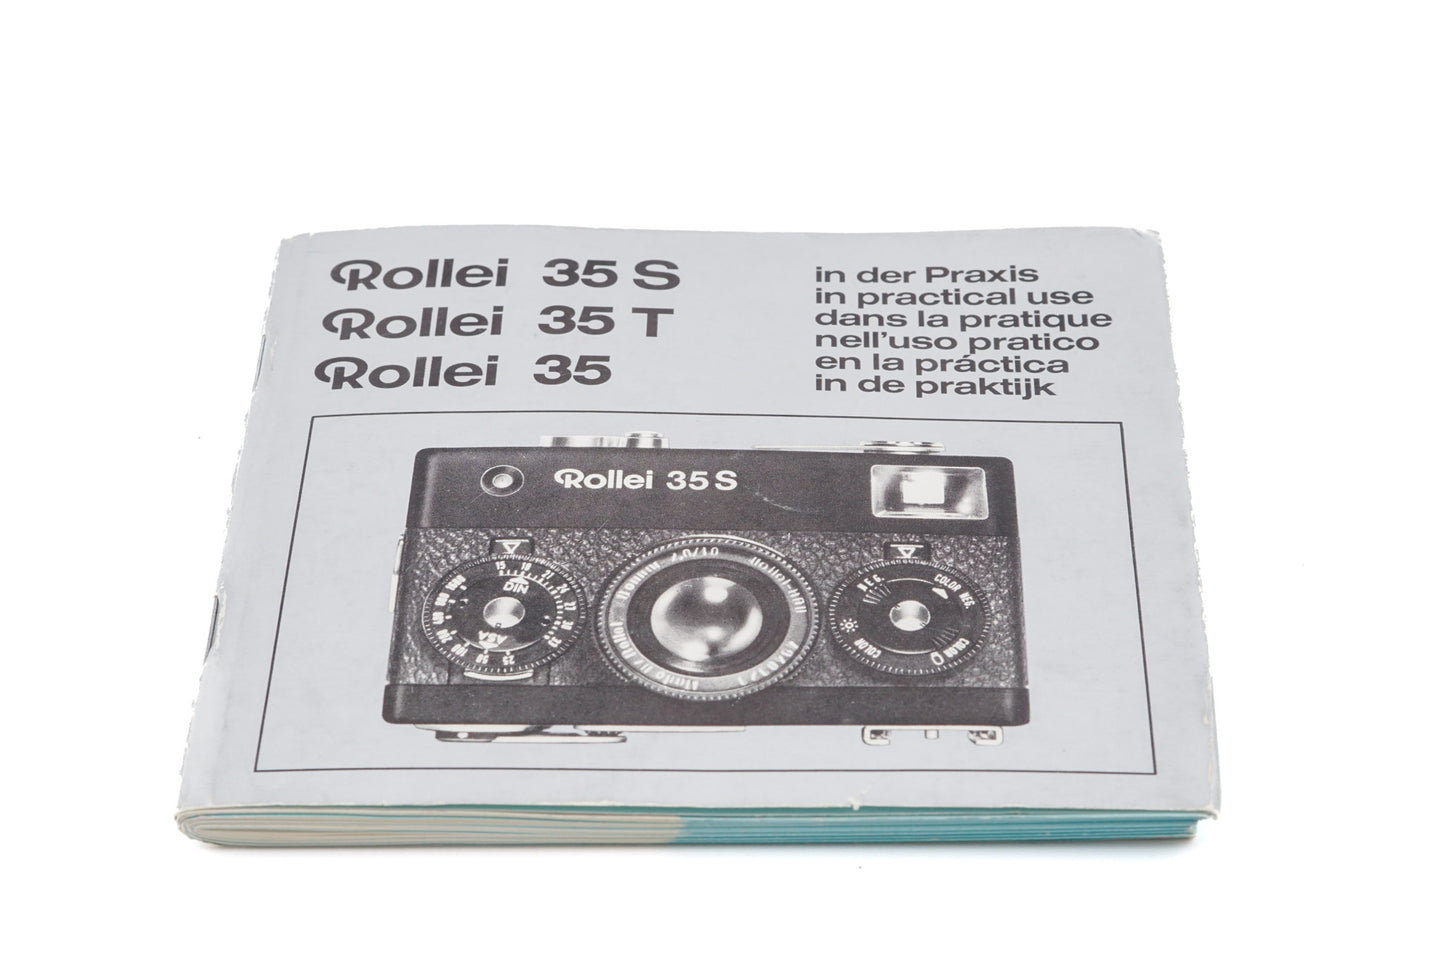 Rollei 35, 35 S, & 35 T "In Practical Use" Instructions